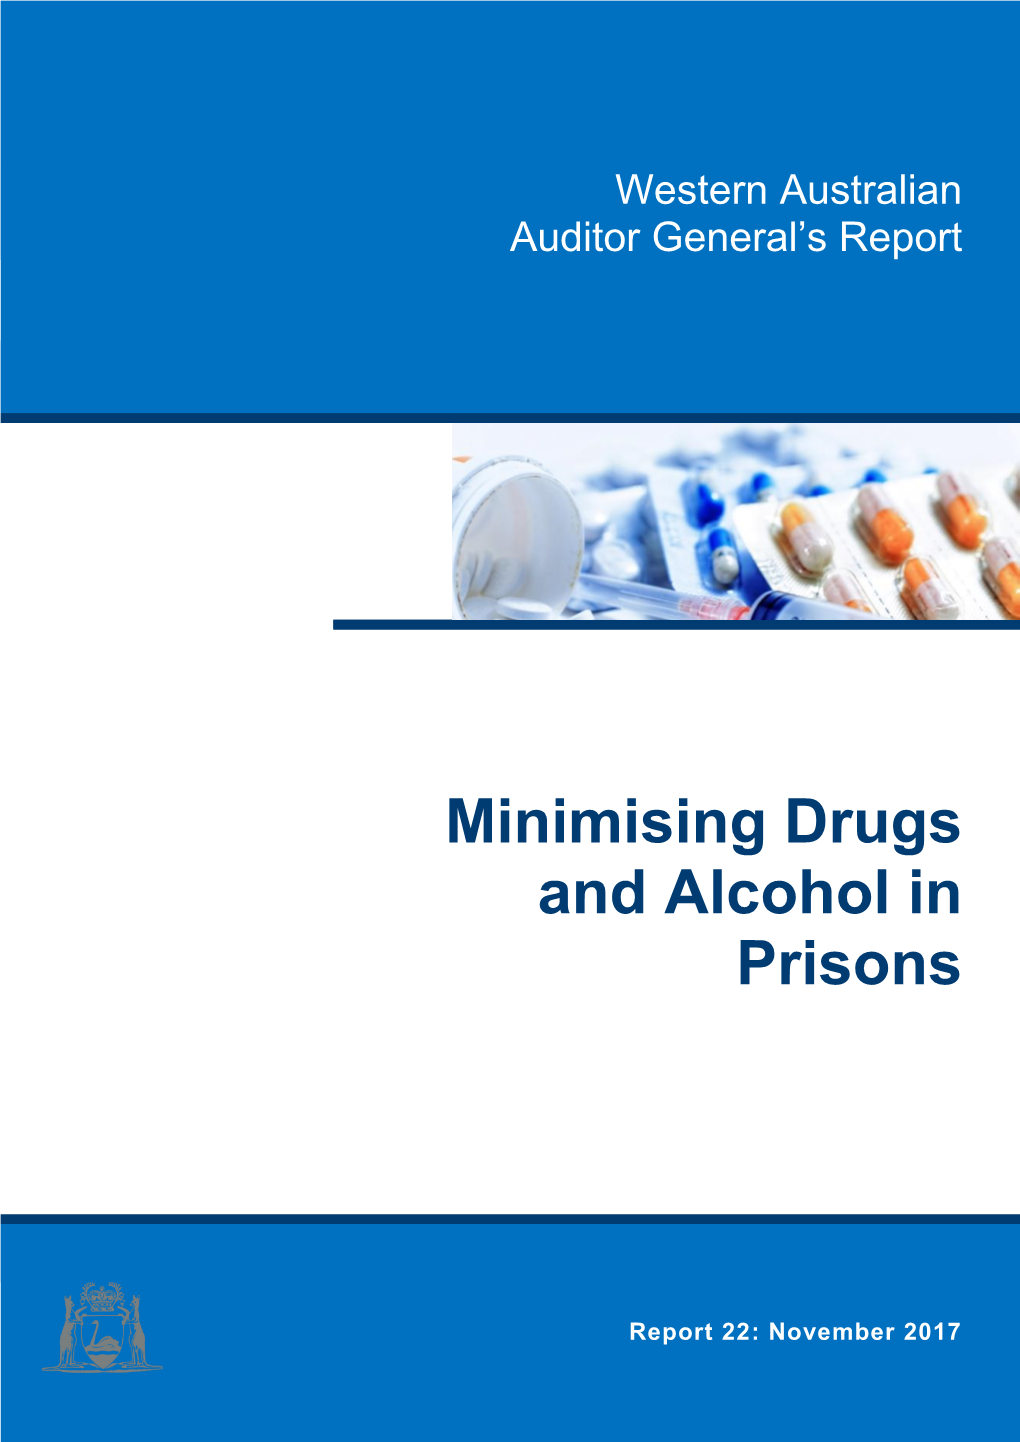 Minimising Drugs and Alcohol in Prisons